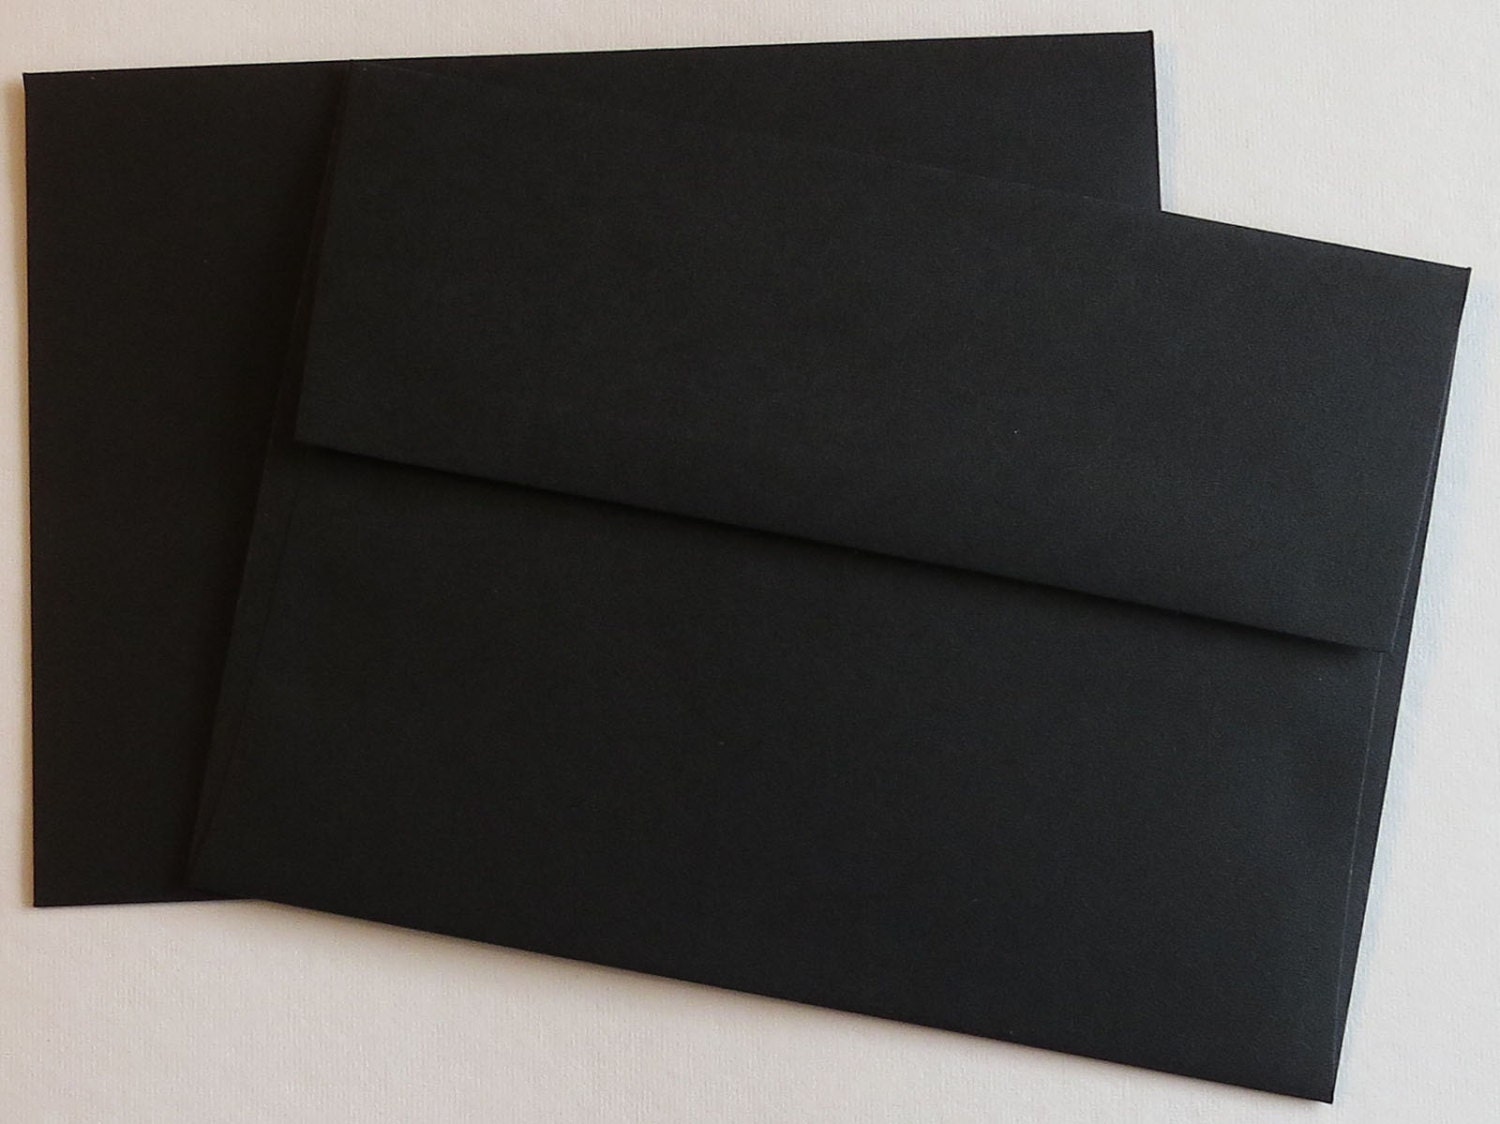 CLEARANCE Black Envelopes, Party Invitations, Greeting Card Supplies, MiniatureSweet, Kawaii Resin Crafts, Decoden Cabochons Supplies